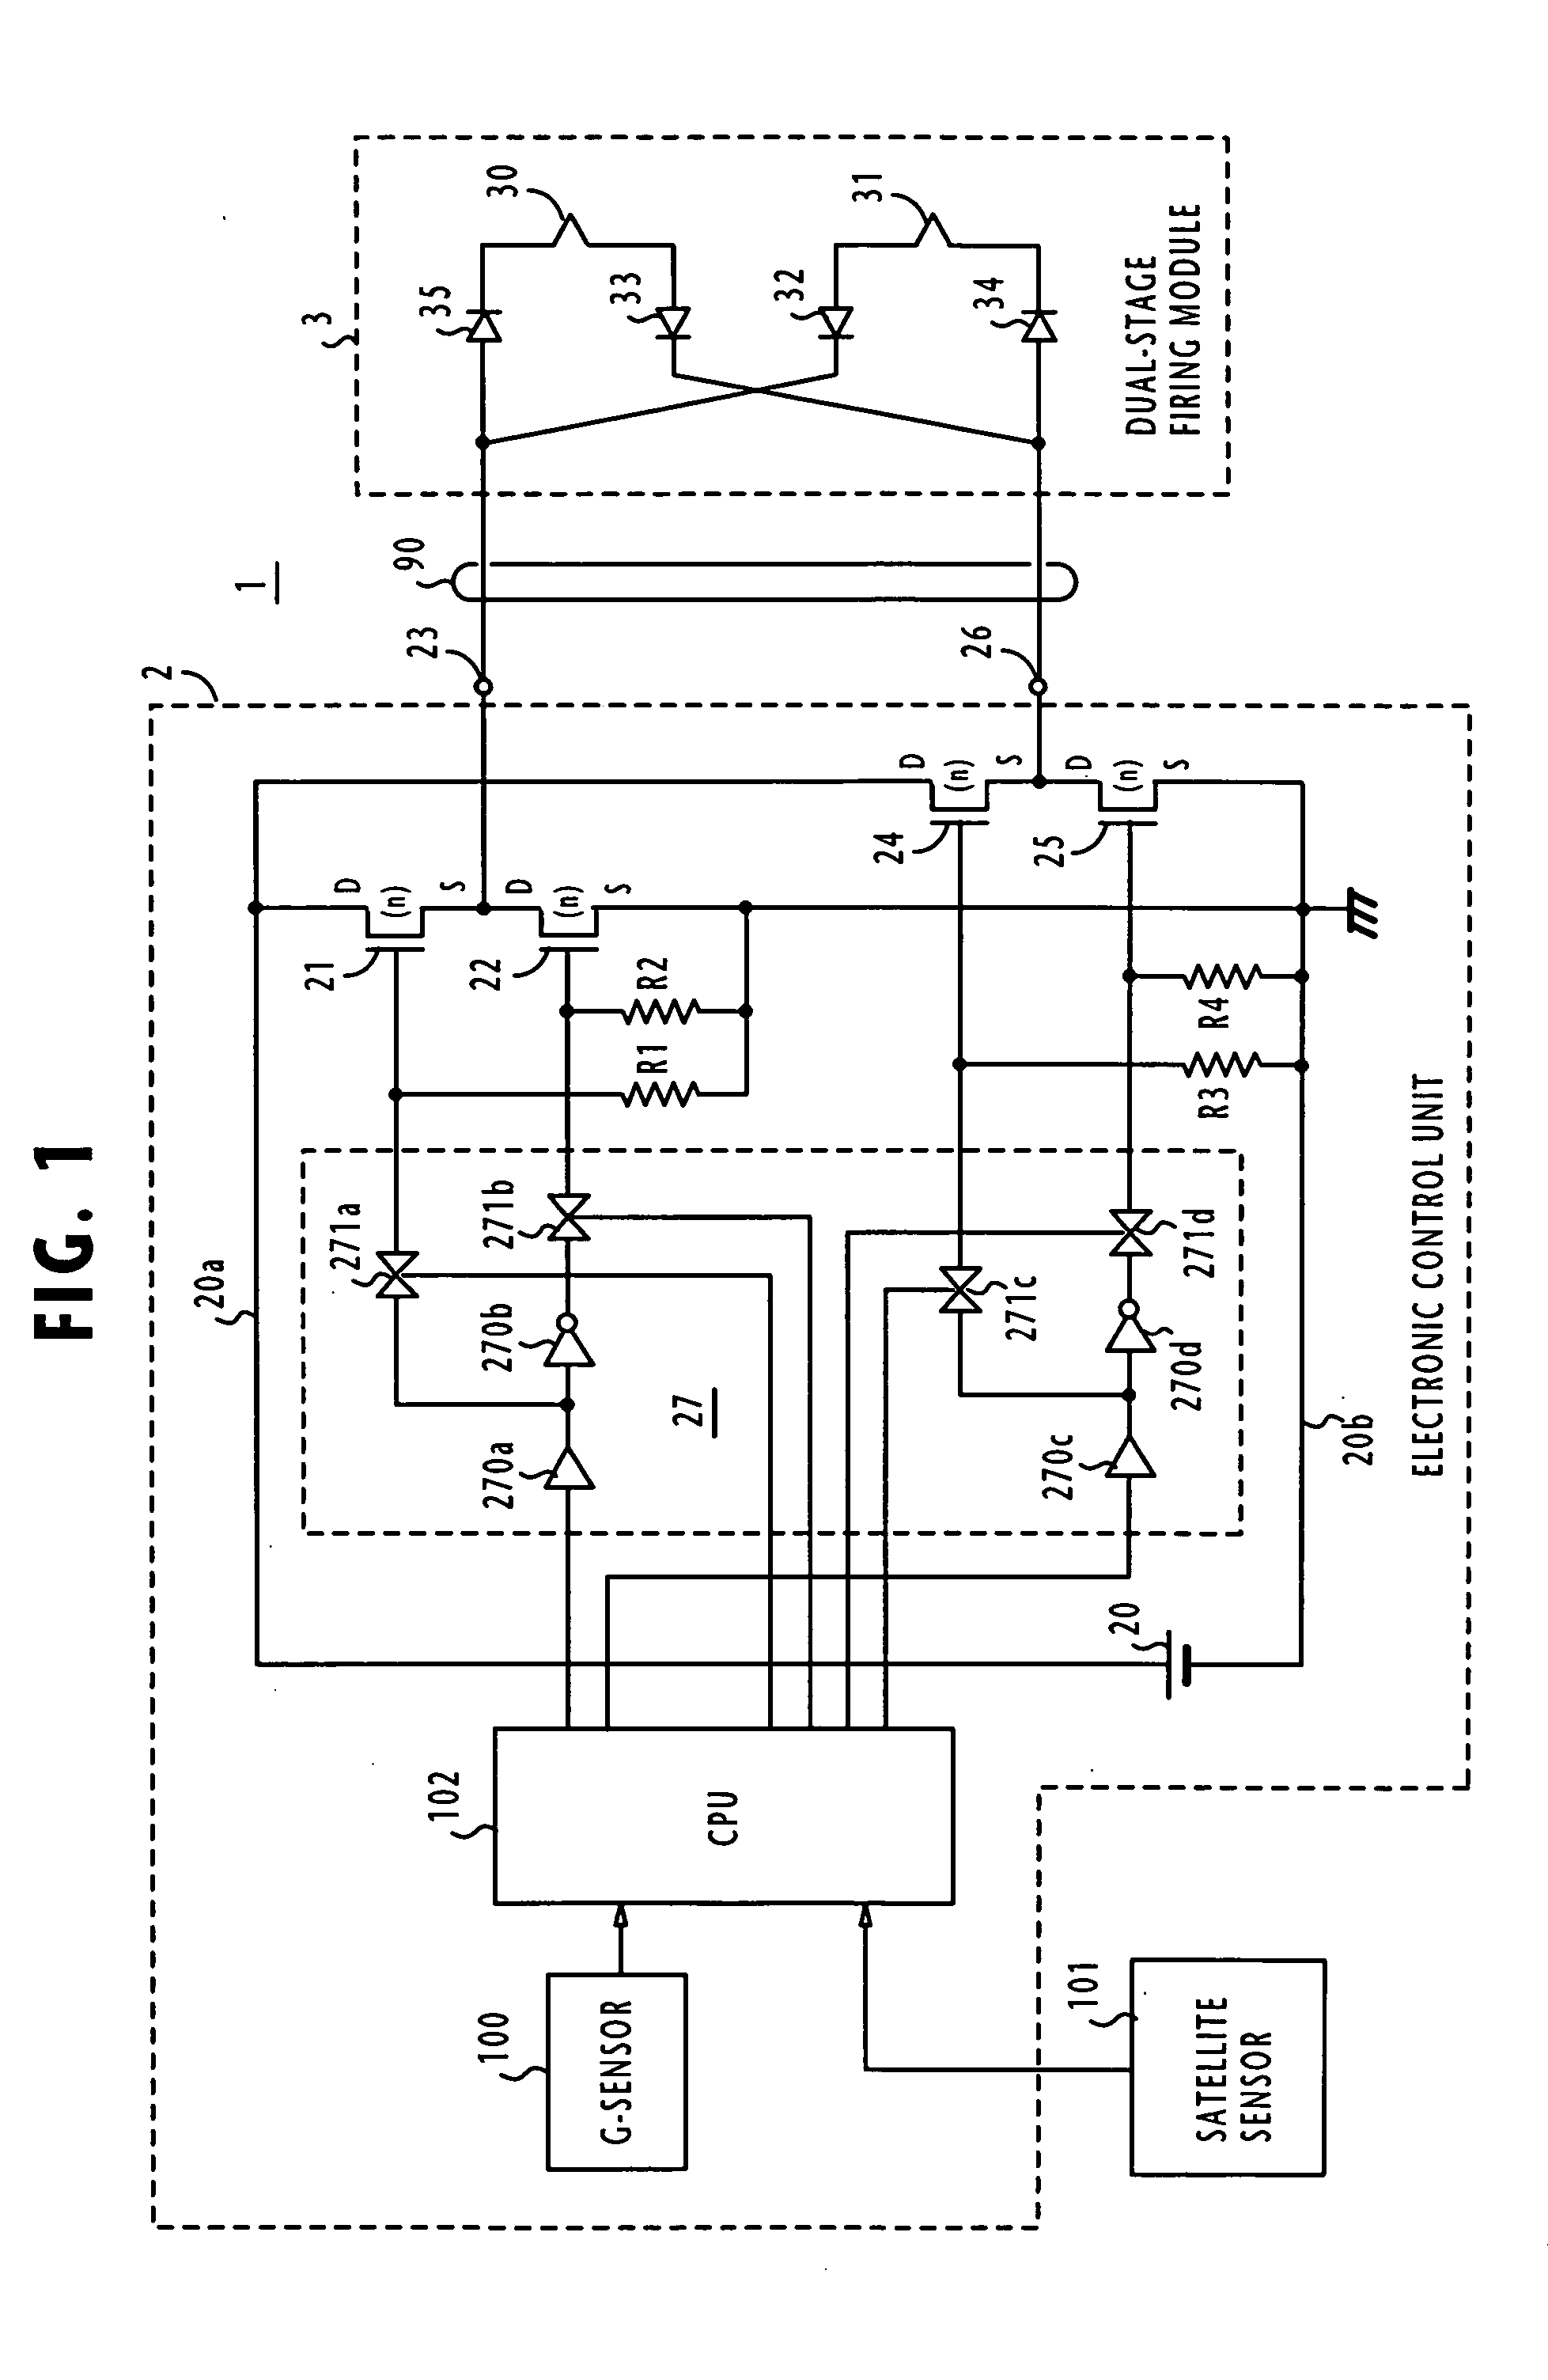 Electronic control unit and system for controlling dual-stage occupant restraint system